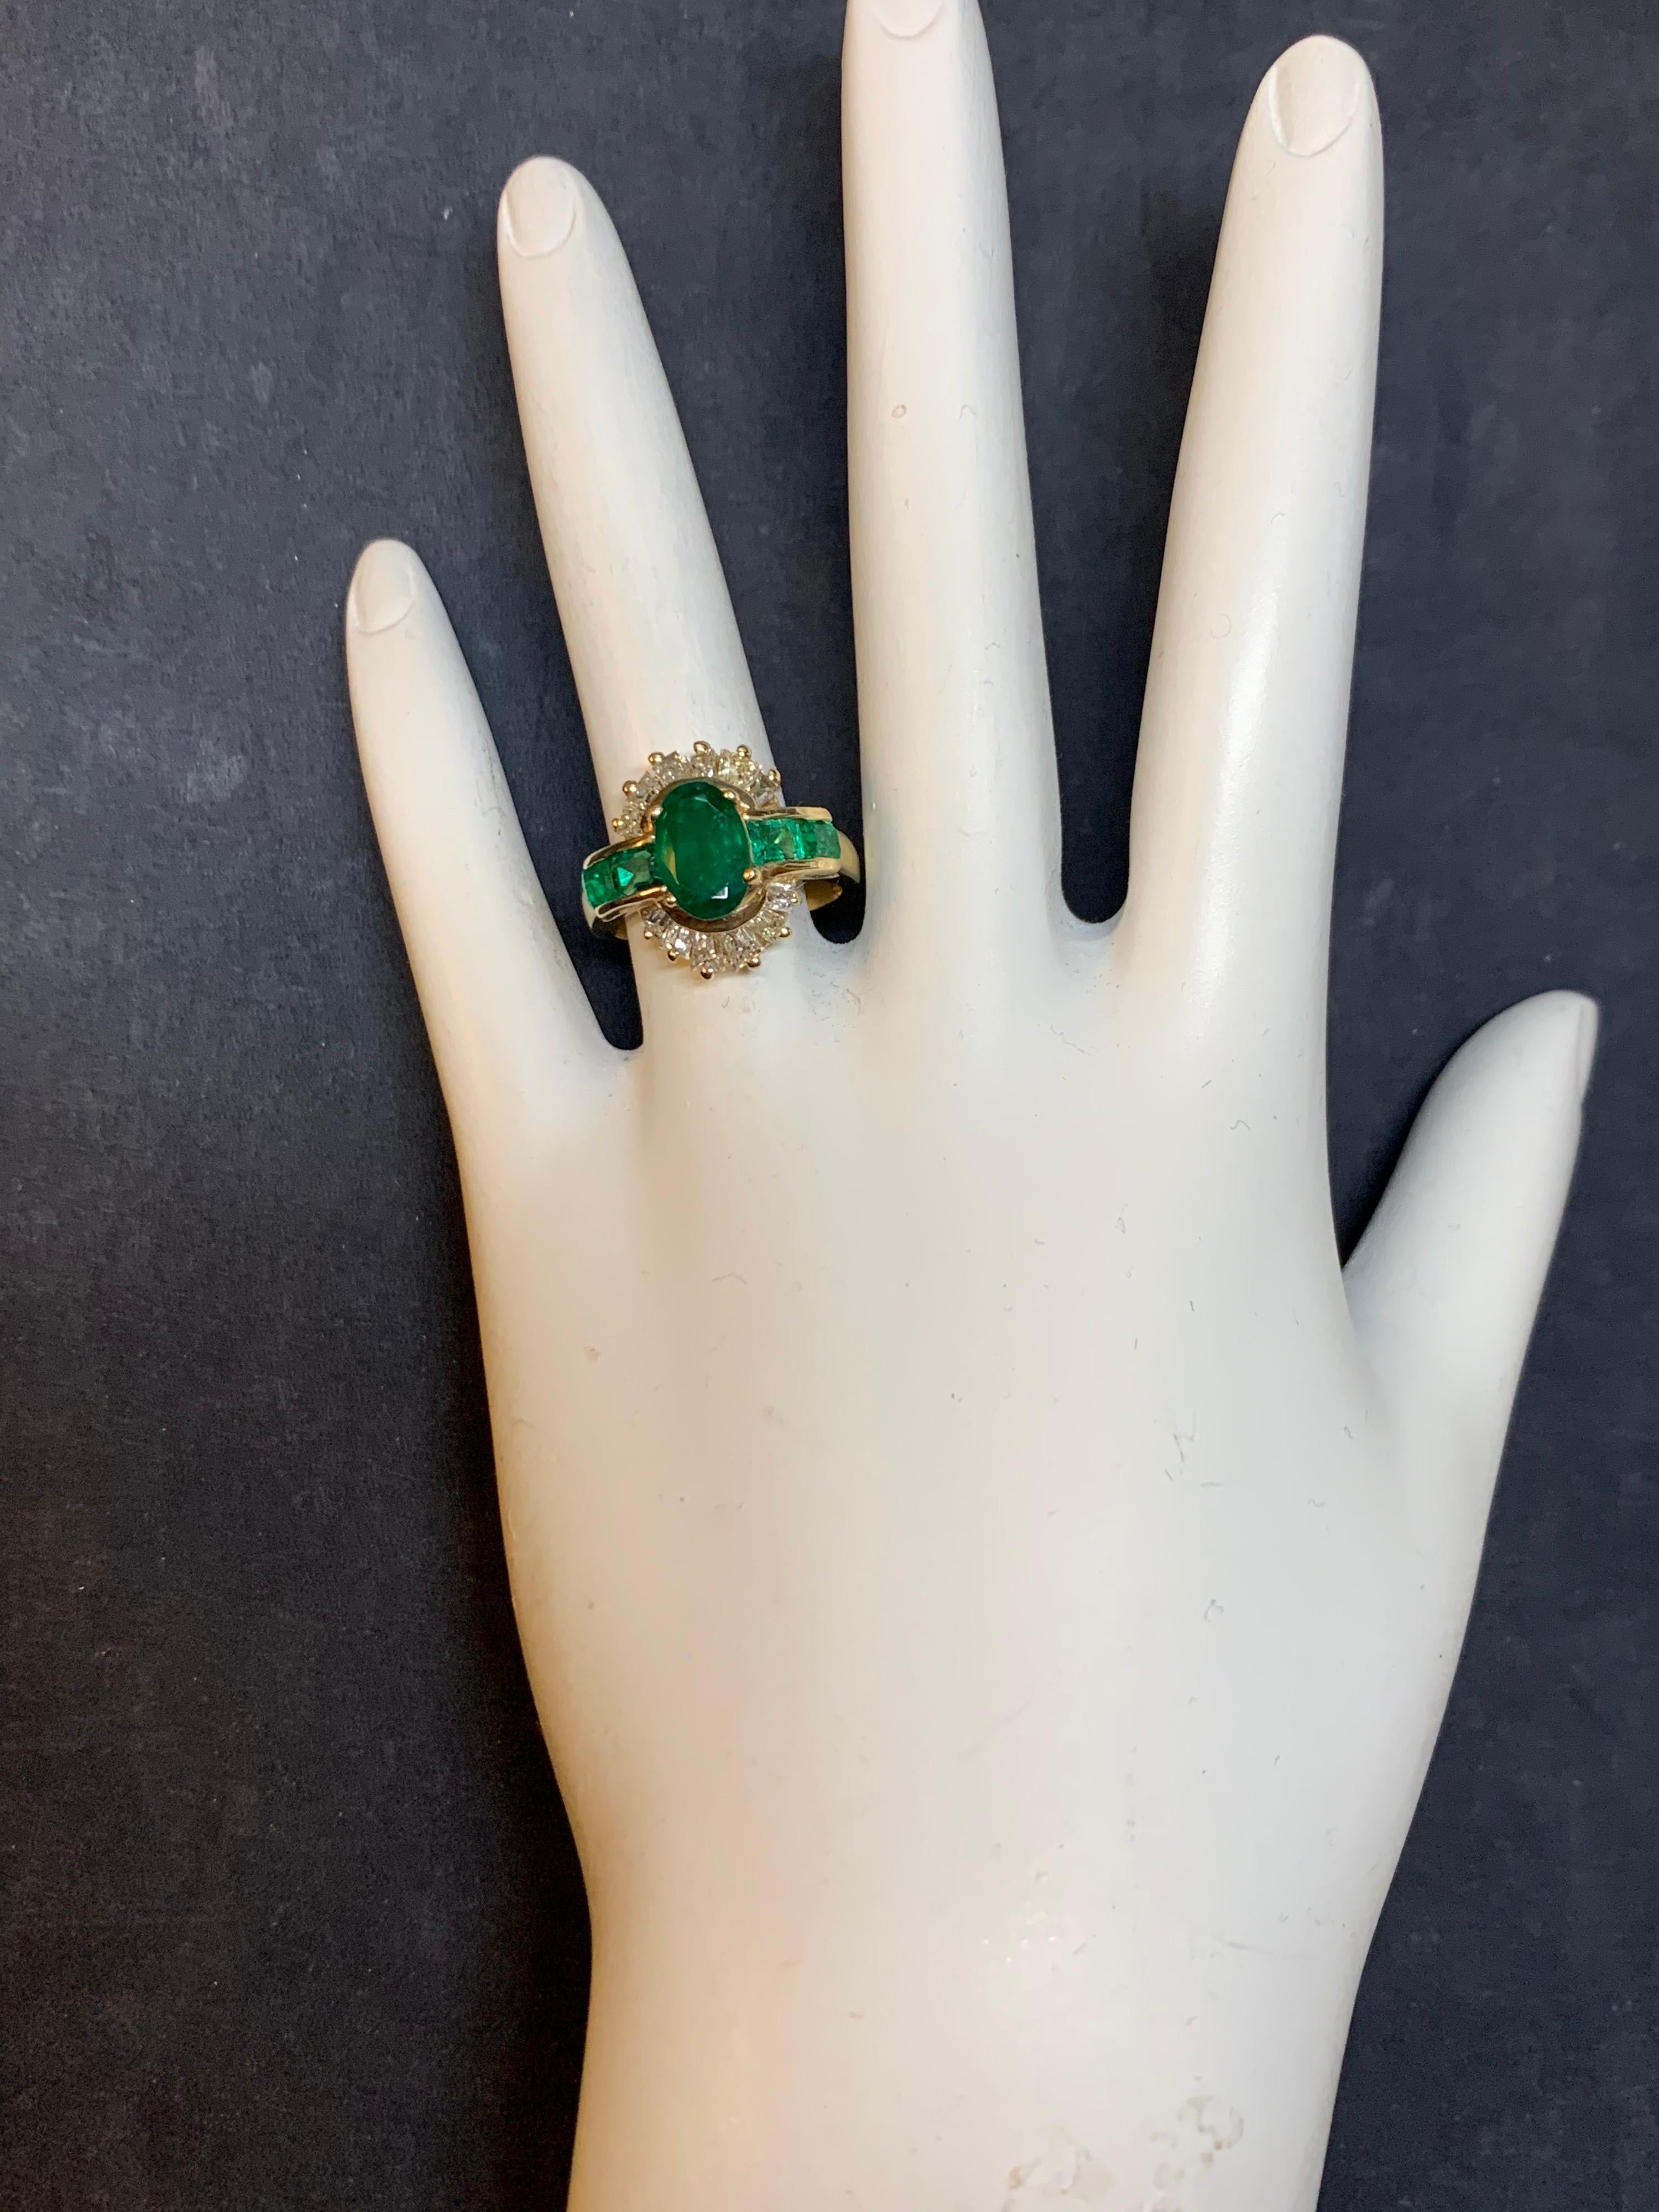 Retro 14k Yellow Gold Cocktail Ringset with approximately 3.10 Carats of Natural Diamonds & Oval Green Emerald.

The center oval measurements are 9.1x5.95x3.5 and weighs approximately 1.50 carats. The four sidestone natural emeralds weigh